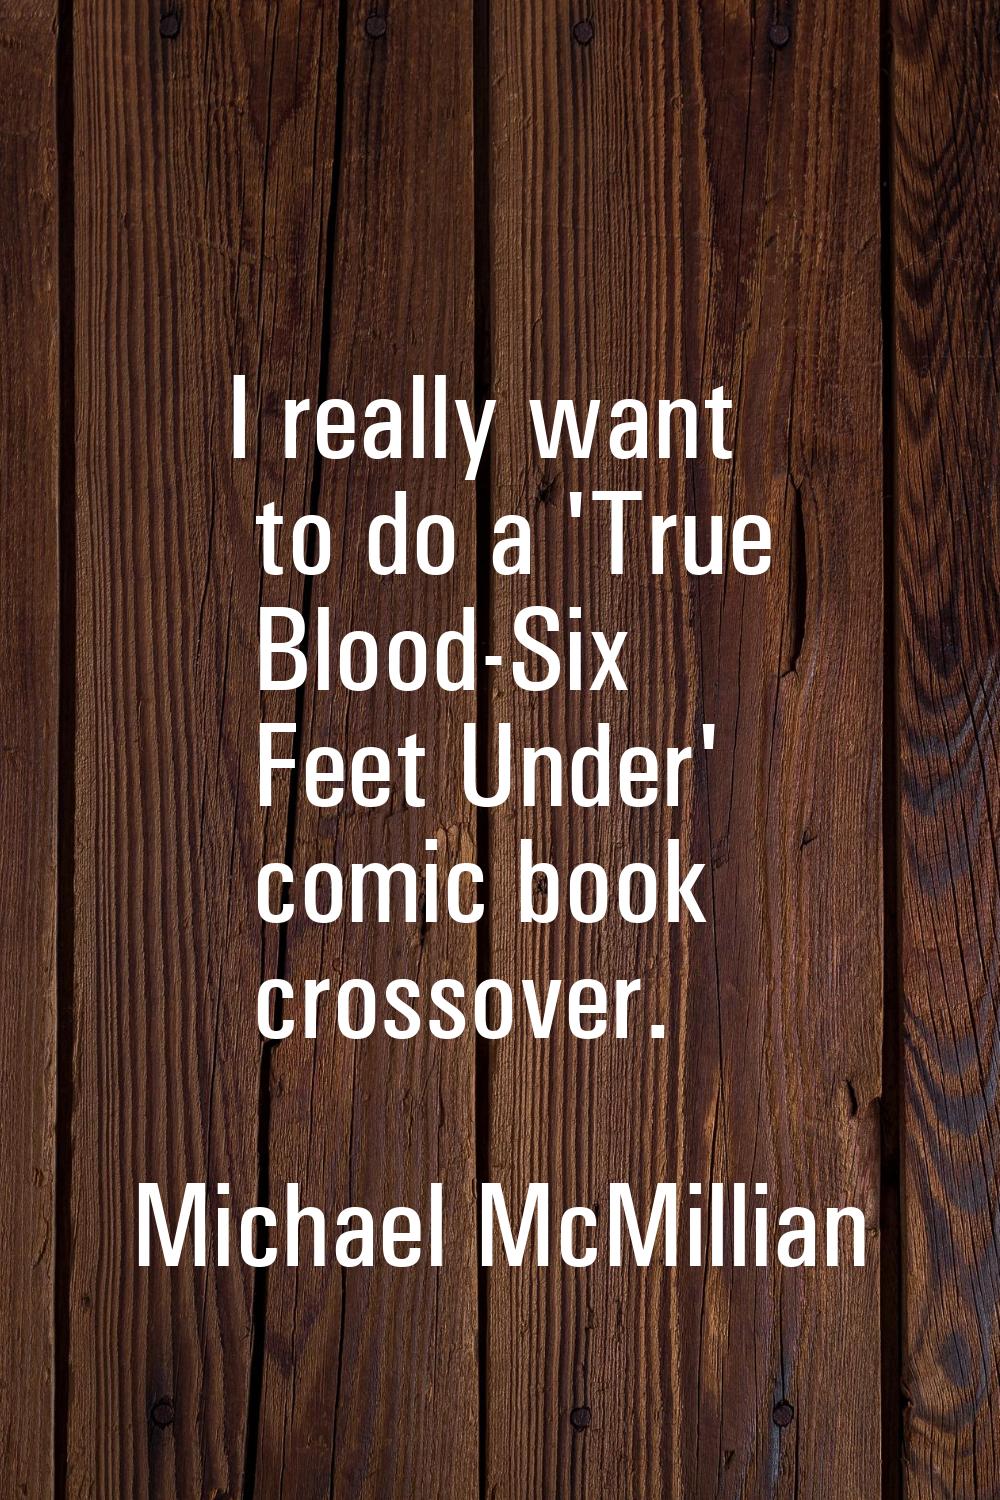 I really want to do a 'True Blood-Six Feet Under' comic book crossover.